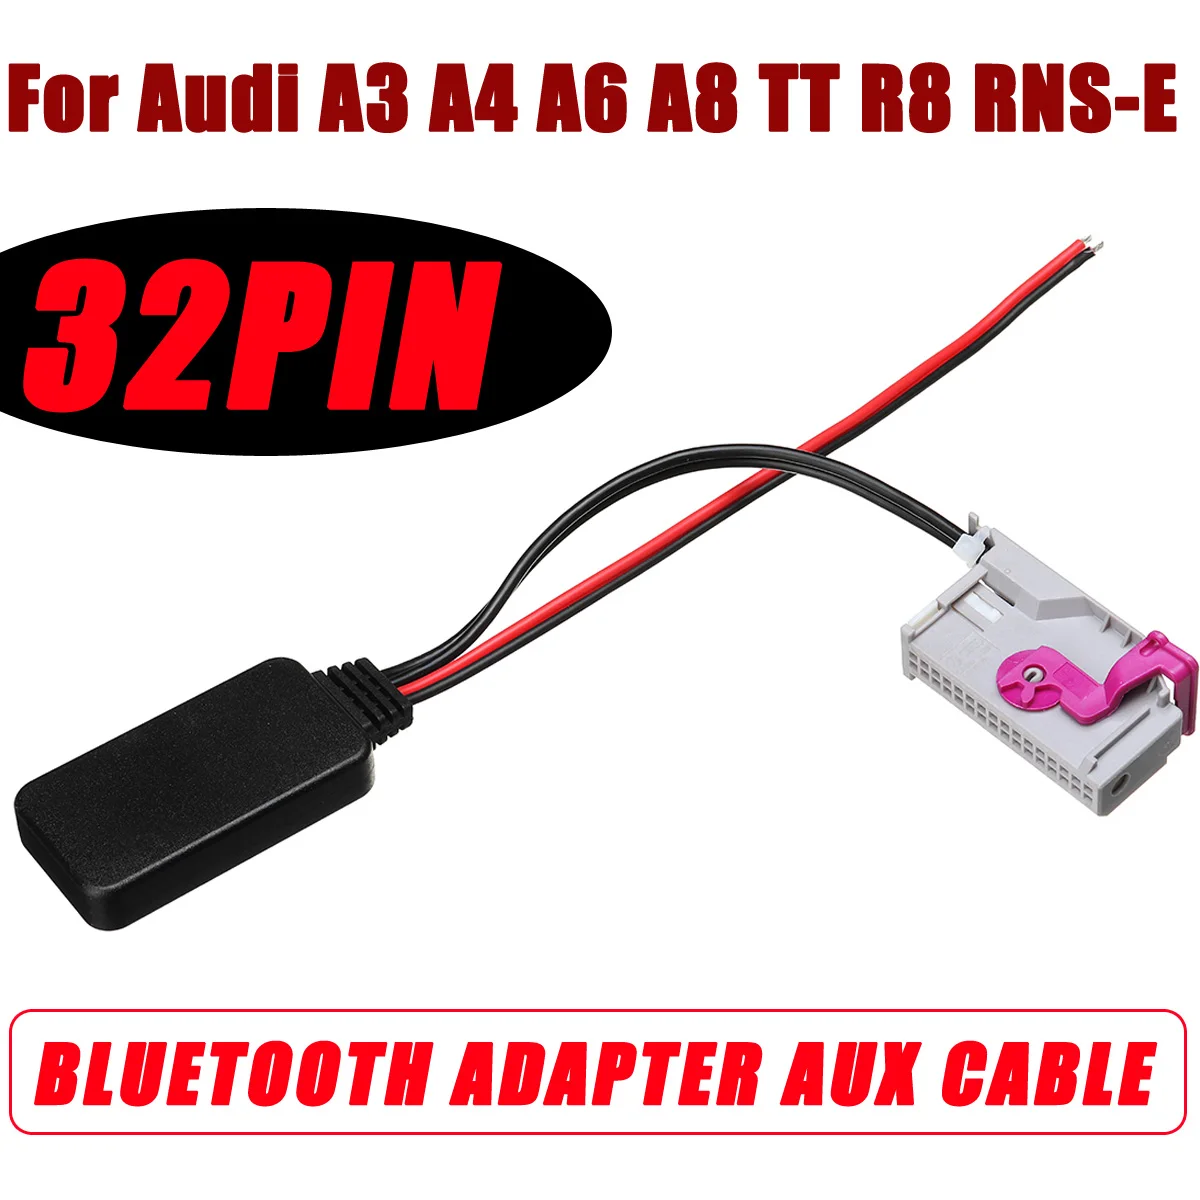 For Audi A3 A4 A6 A8 TT R8 RNS E 32Pin Wireless bluetooth Adapter Aux Cable  Auto bluetooth Car Kit Music Audio Receiver Adapter|Bluetooth Car Kit| -  AliExpress